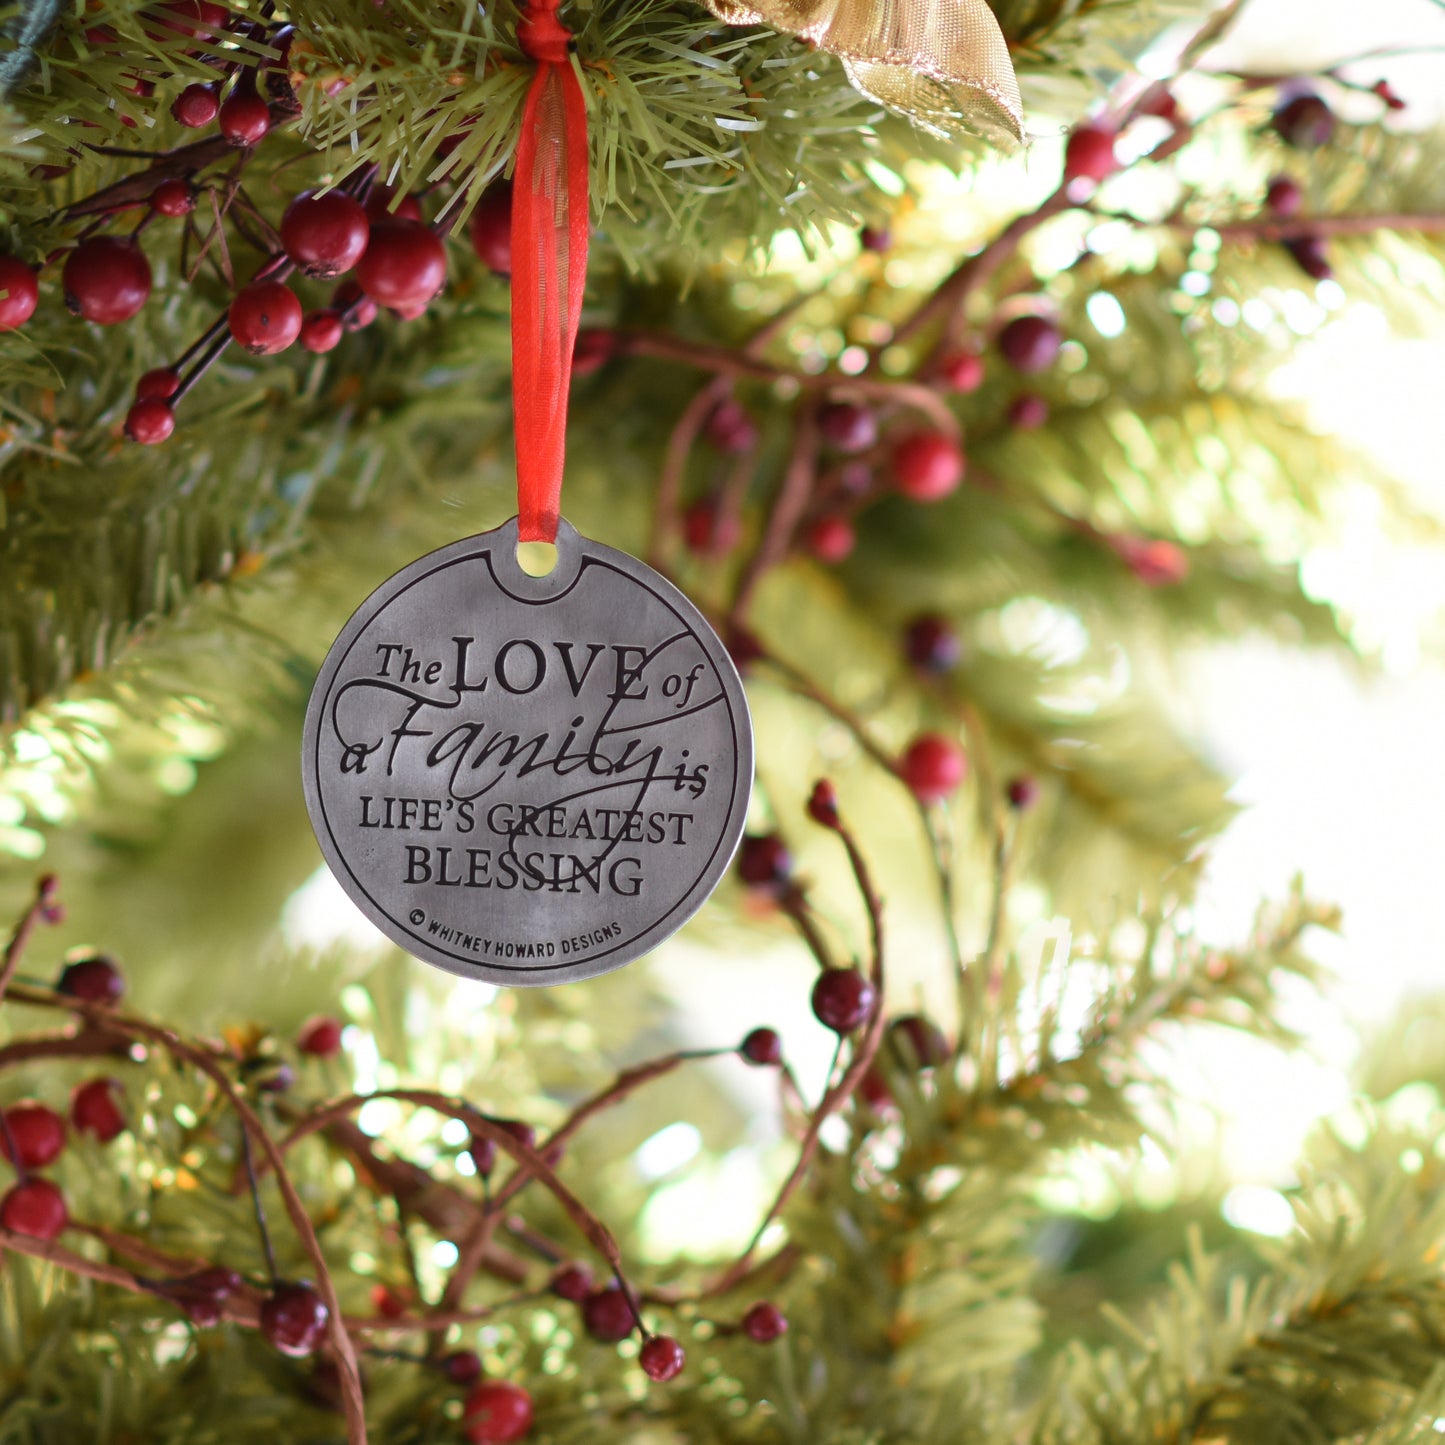 The Love of a Family is Life's Greatest Blessing Holiday Ornament hanging on a tree